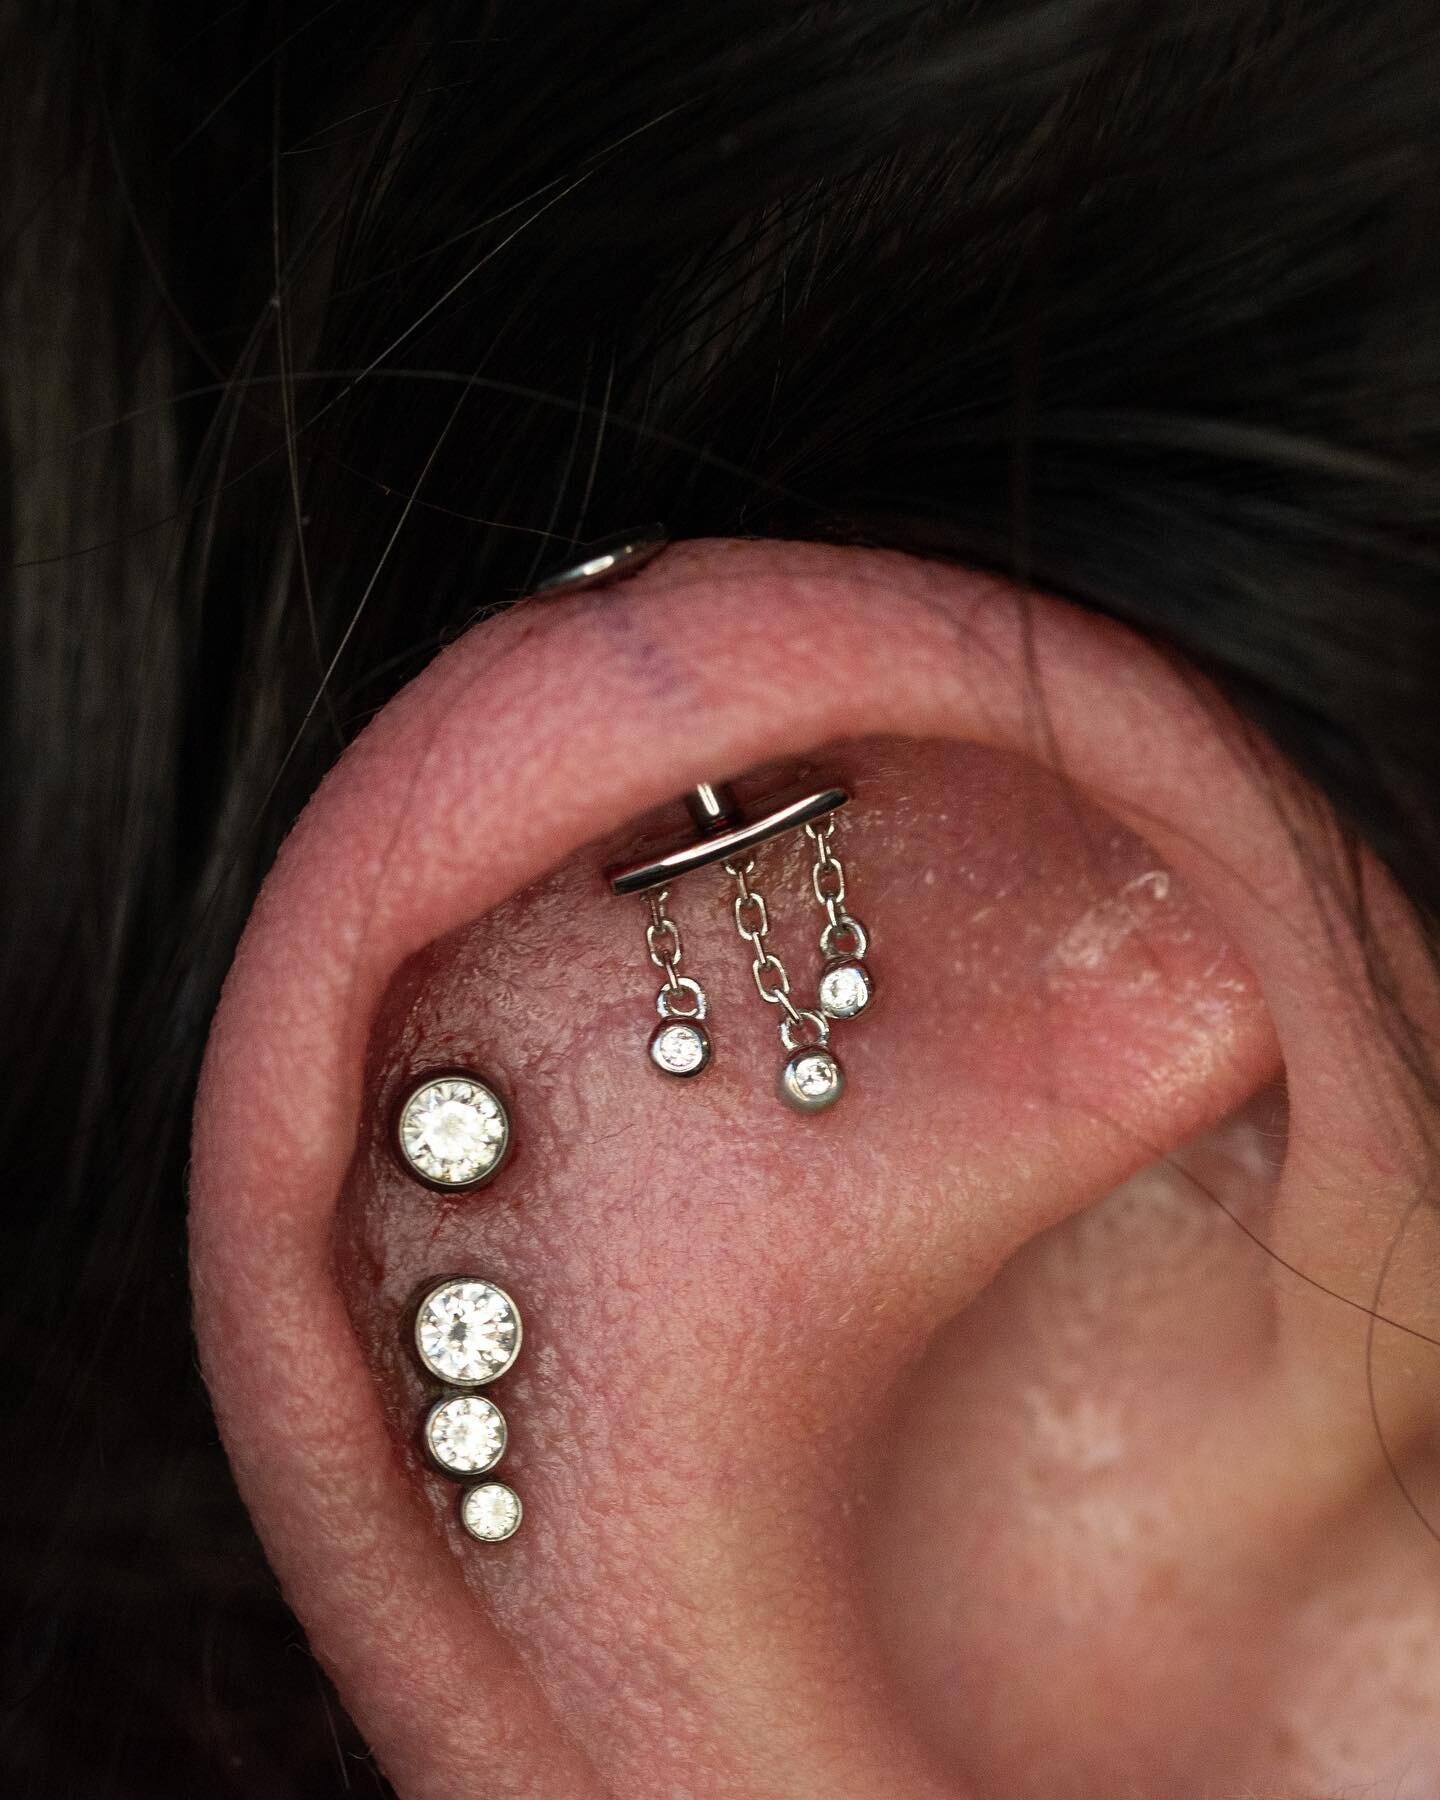 Amanda was one of the first clients I got to do jewelry installs on, and last week she let me add this fun little vertical helix to her ear! Y&rsquo;all know I love a dangly little guy. ✨